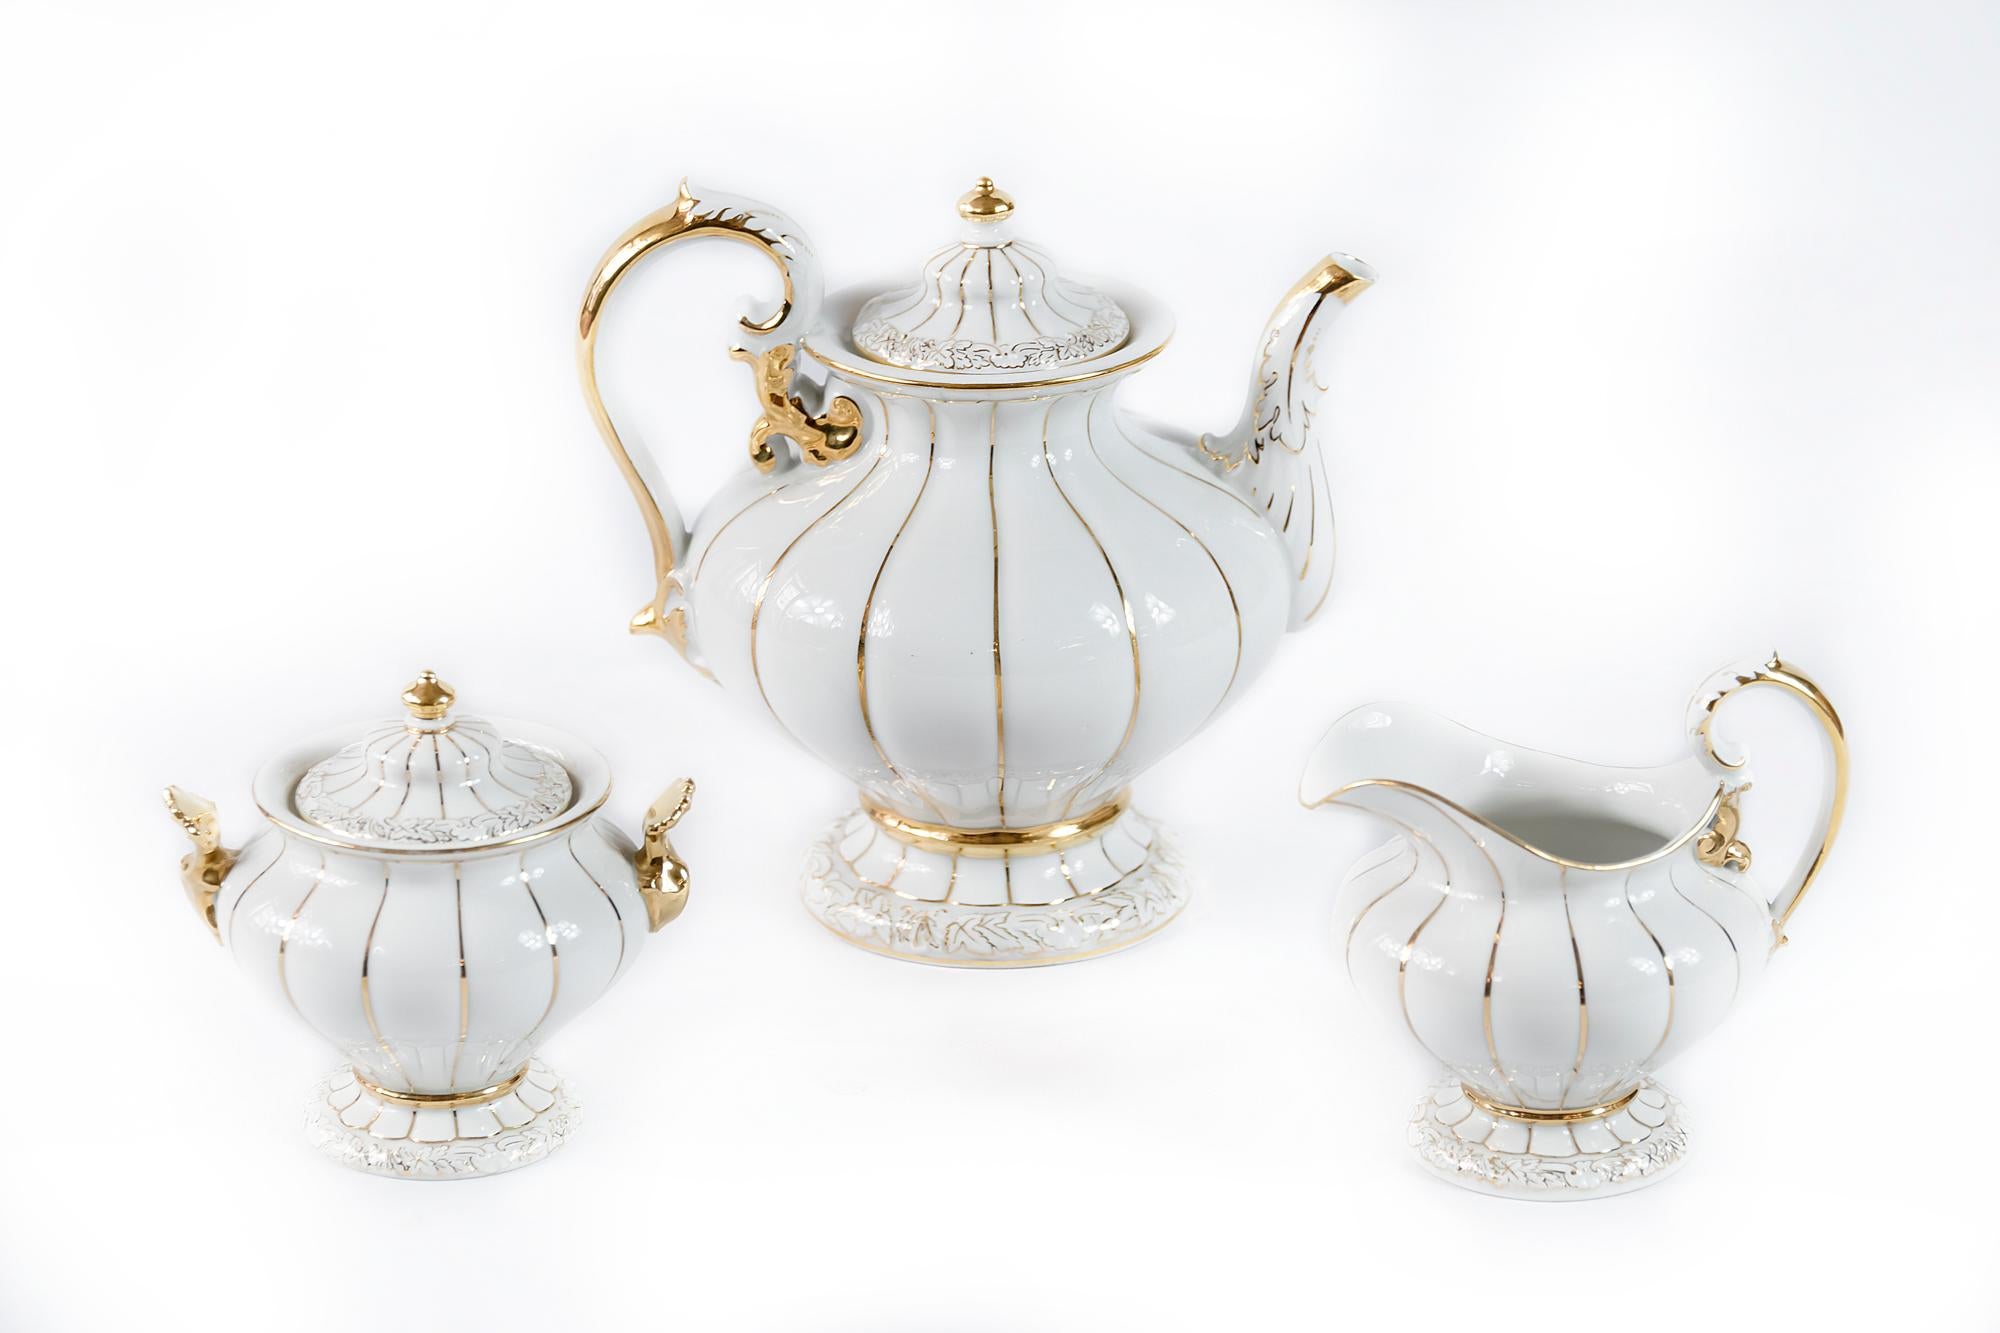 German Meissen porcelain tea set of 3 pieces. Including teapot, milk jug and sugar bowl.
Porcelain is hand painted with gold.
Dimensions of the teapot: 21 x 22 cm.
The logo indicate a porcelain of second-quality grading.